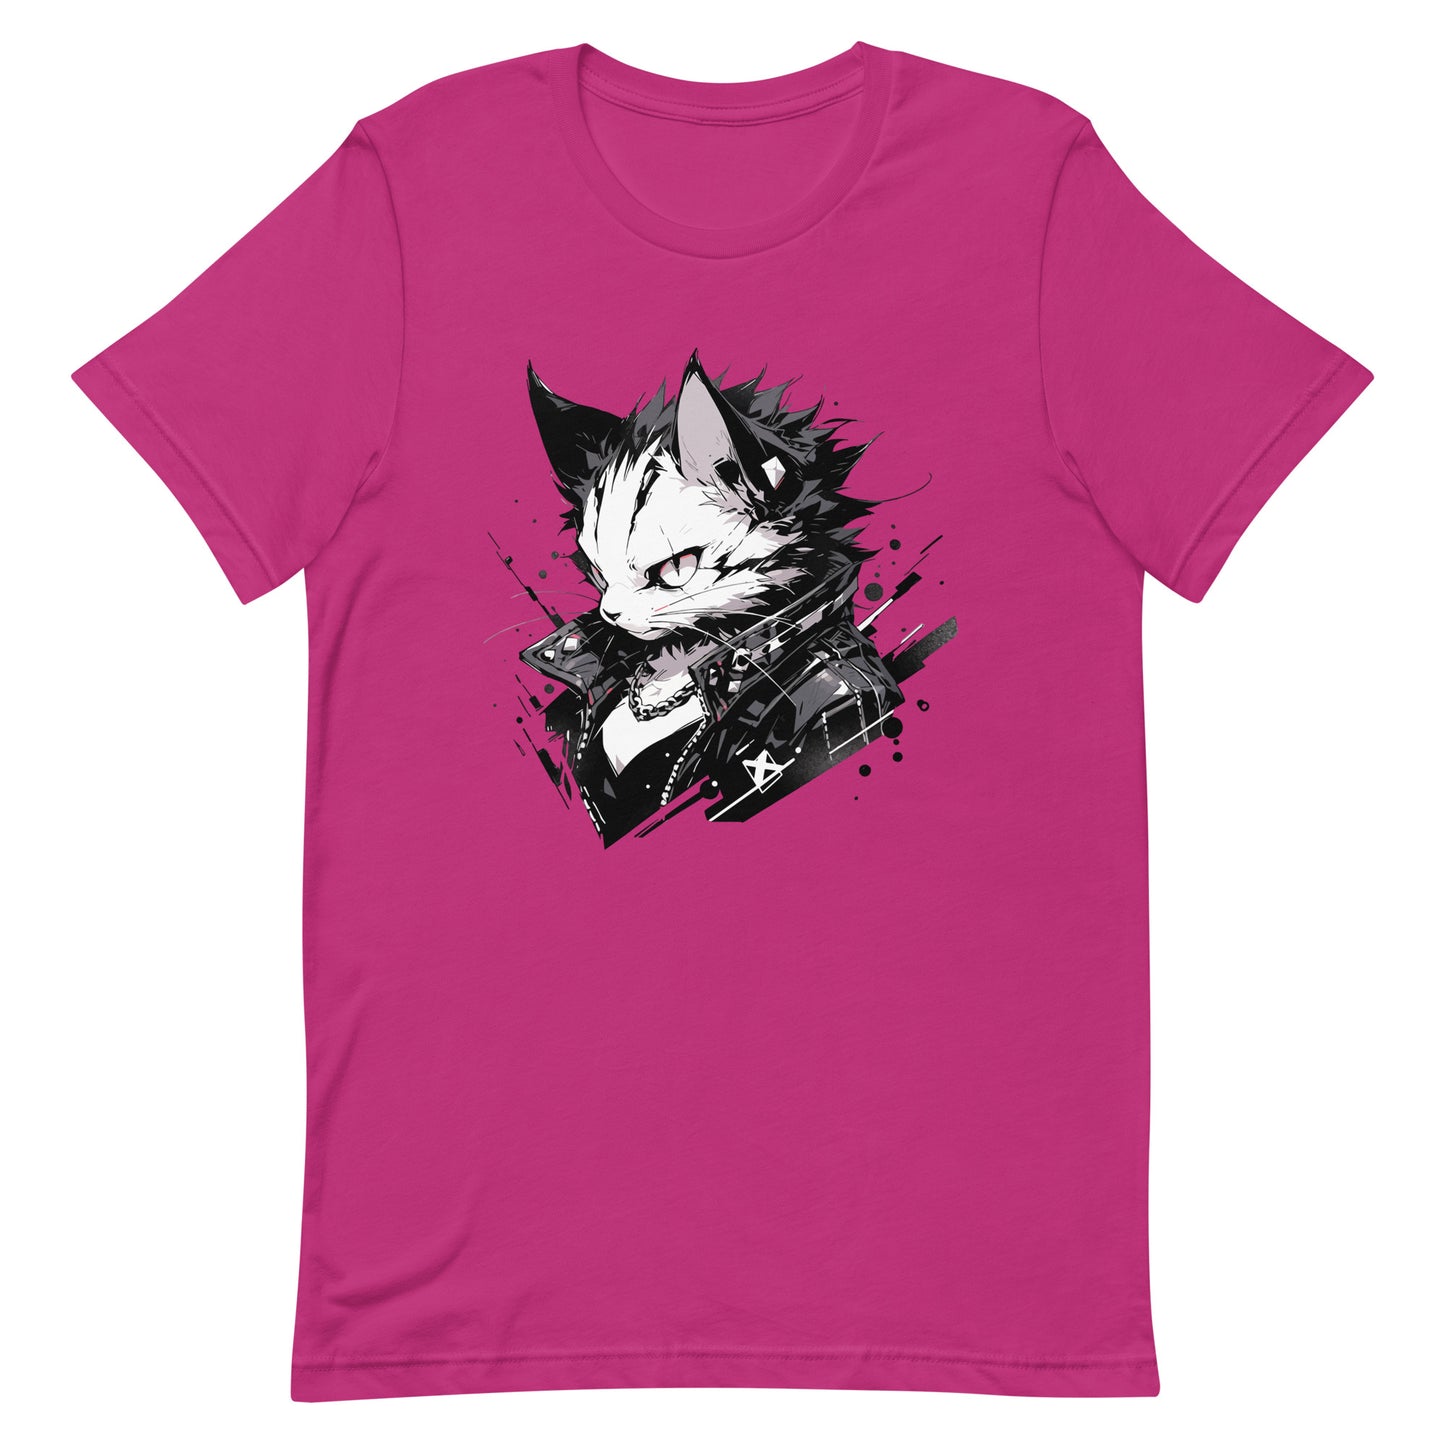 Angry punk kitten in black leather jacket, Cat rock and roll, Cat rocker fashion, Born to be wild - Unisex t-shirt